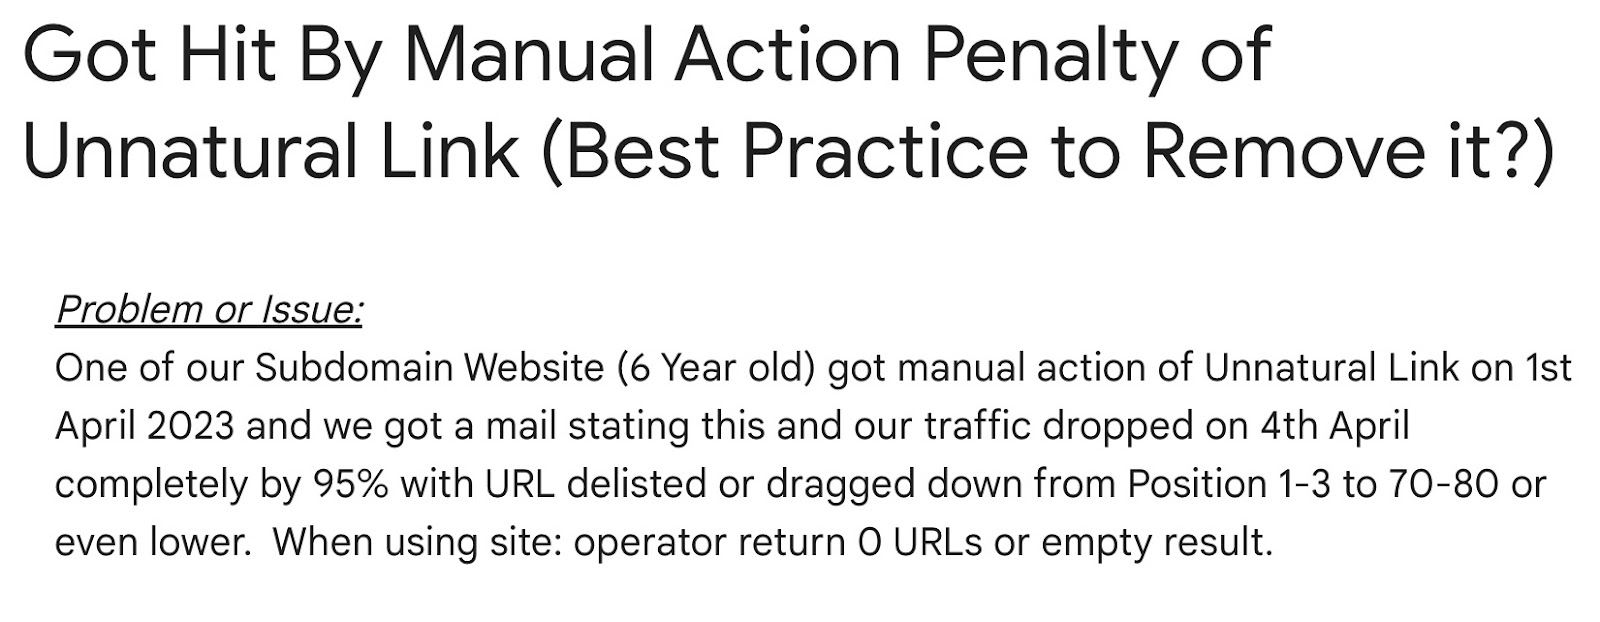 "one of our six year old subdomain's received a manual action for unnatural links and traffic dropped by 95% with url delisted."